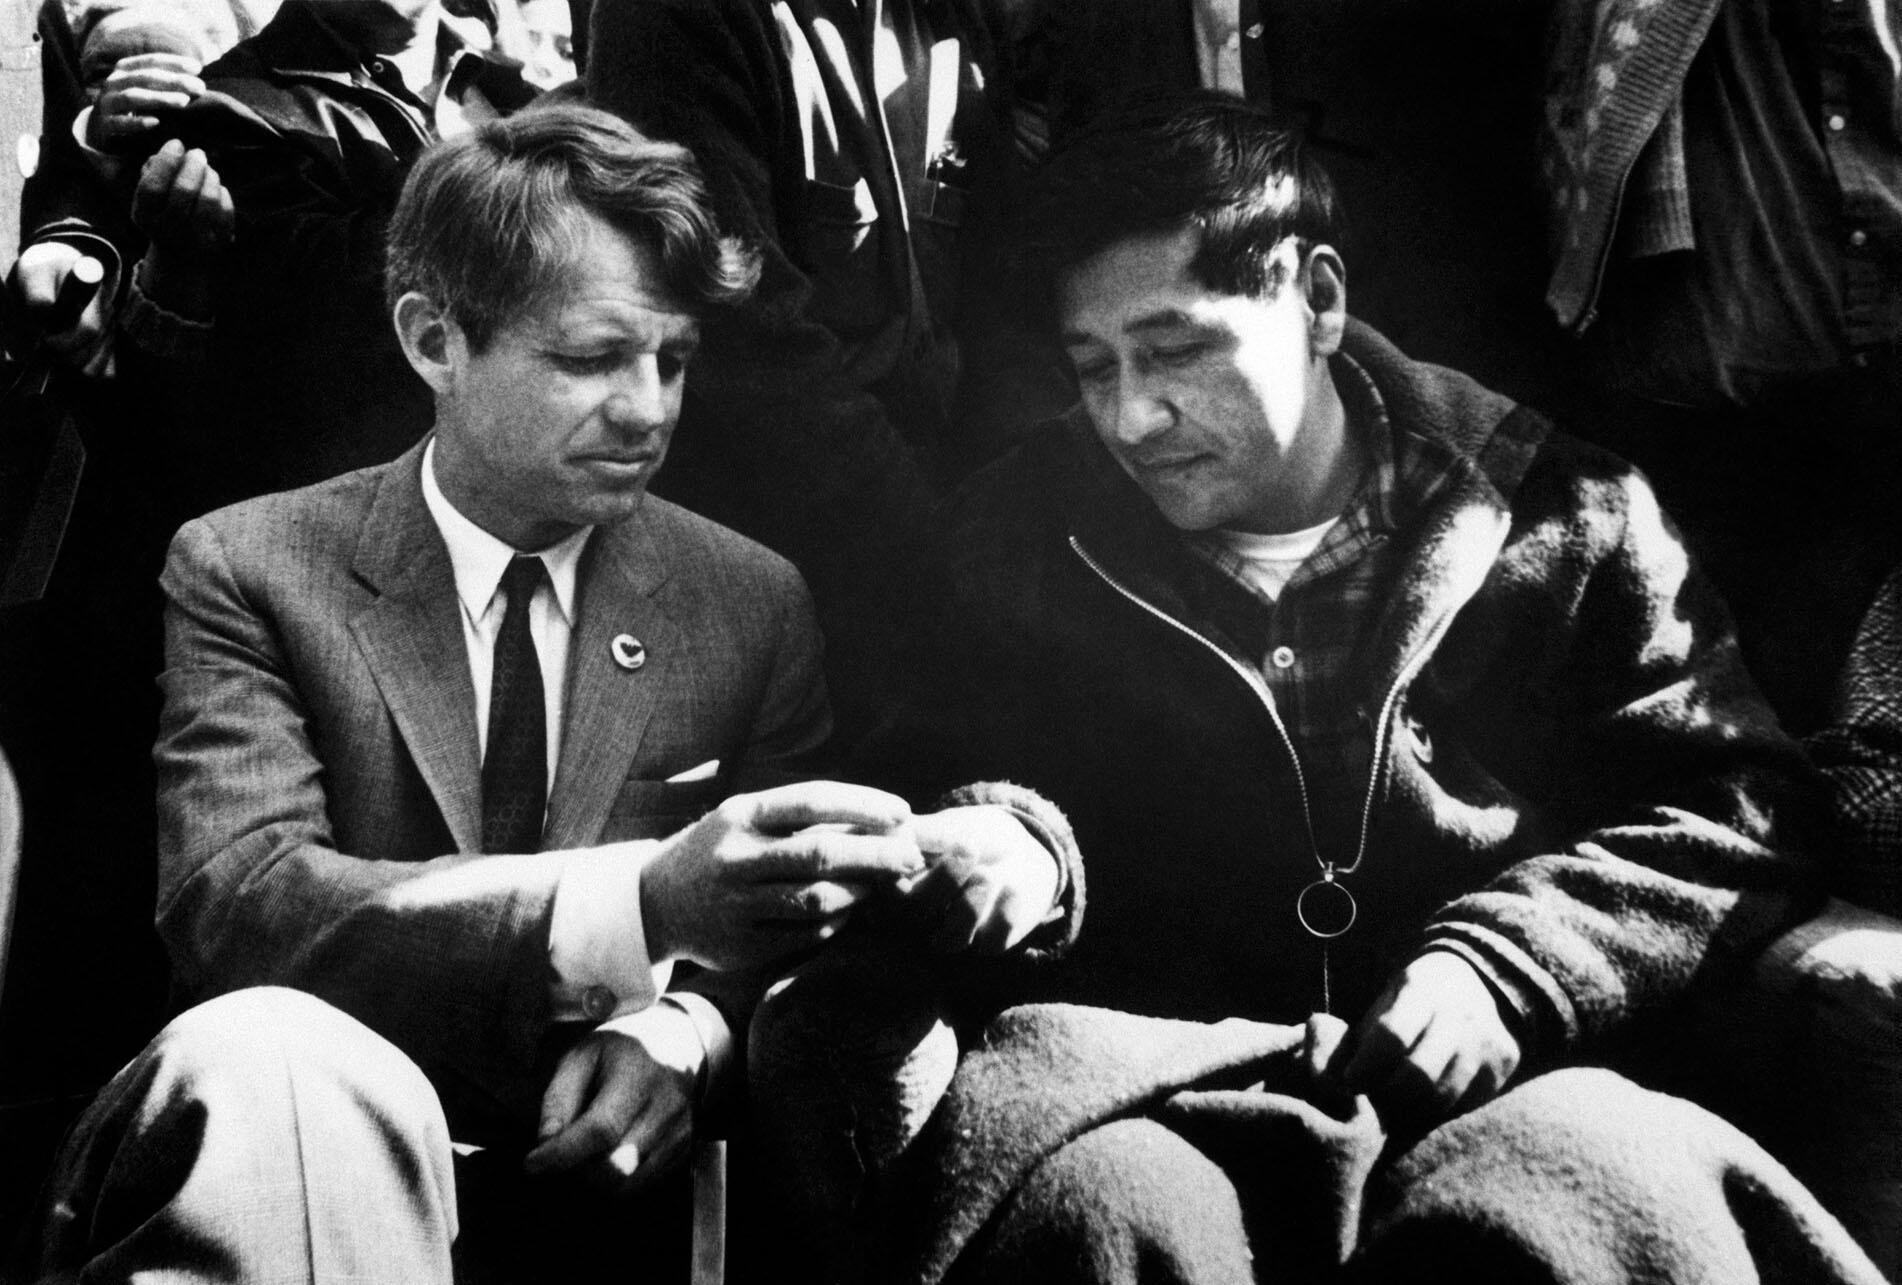 Cesar Chavez breaks his 1968 fast by sharing bread with Robert Kennedy. (Copyright Bettmann/Corbis/AP Images.)